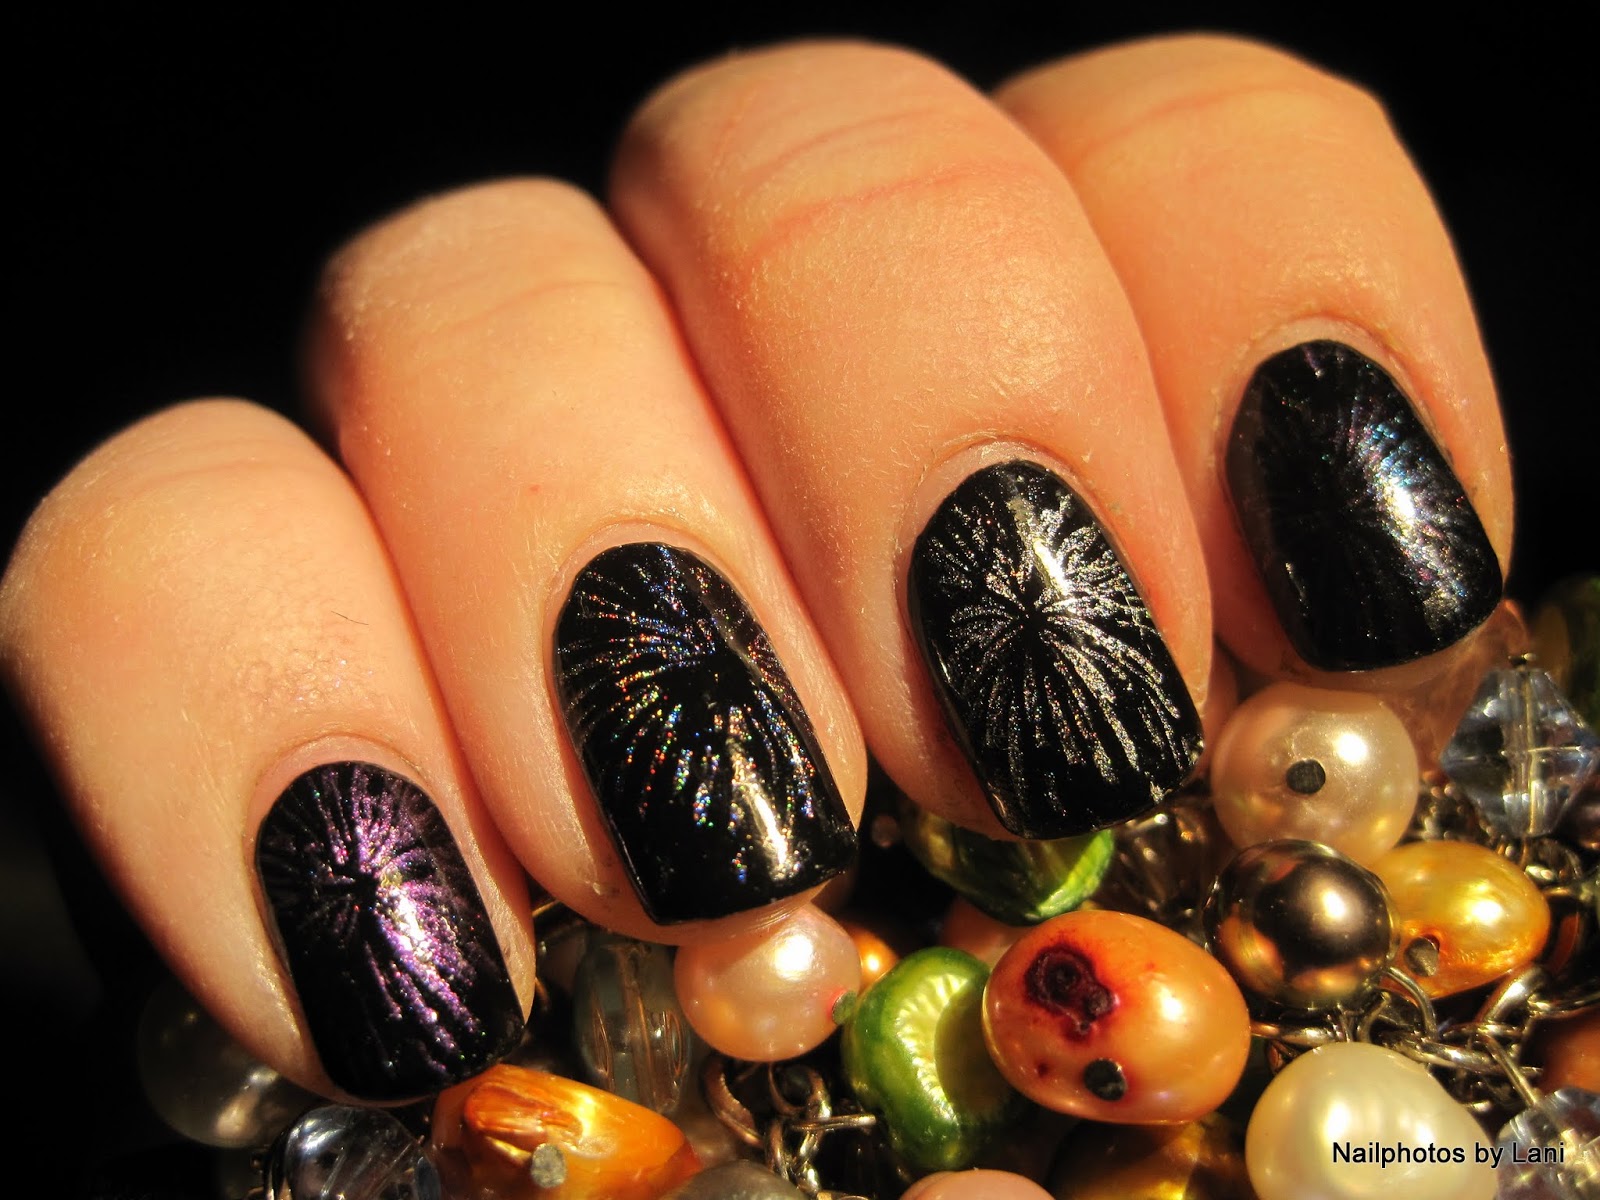 10. Predefined Nail Art Designs for New Year's Eve - wide 7